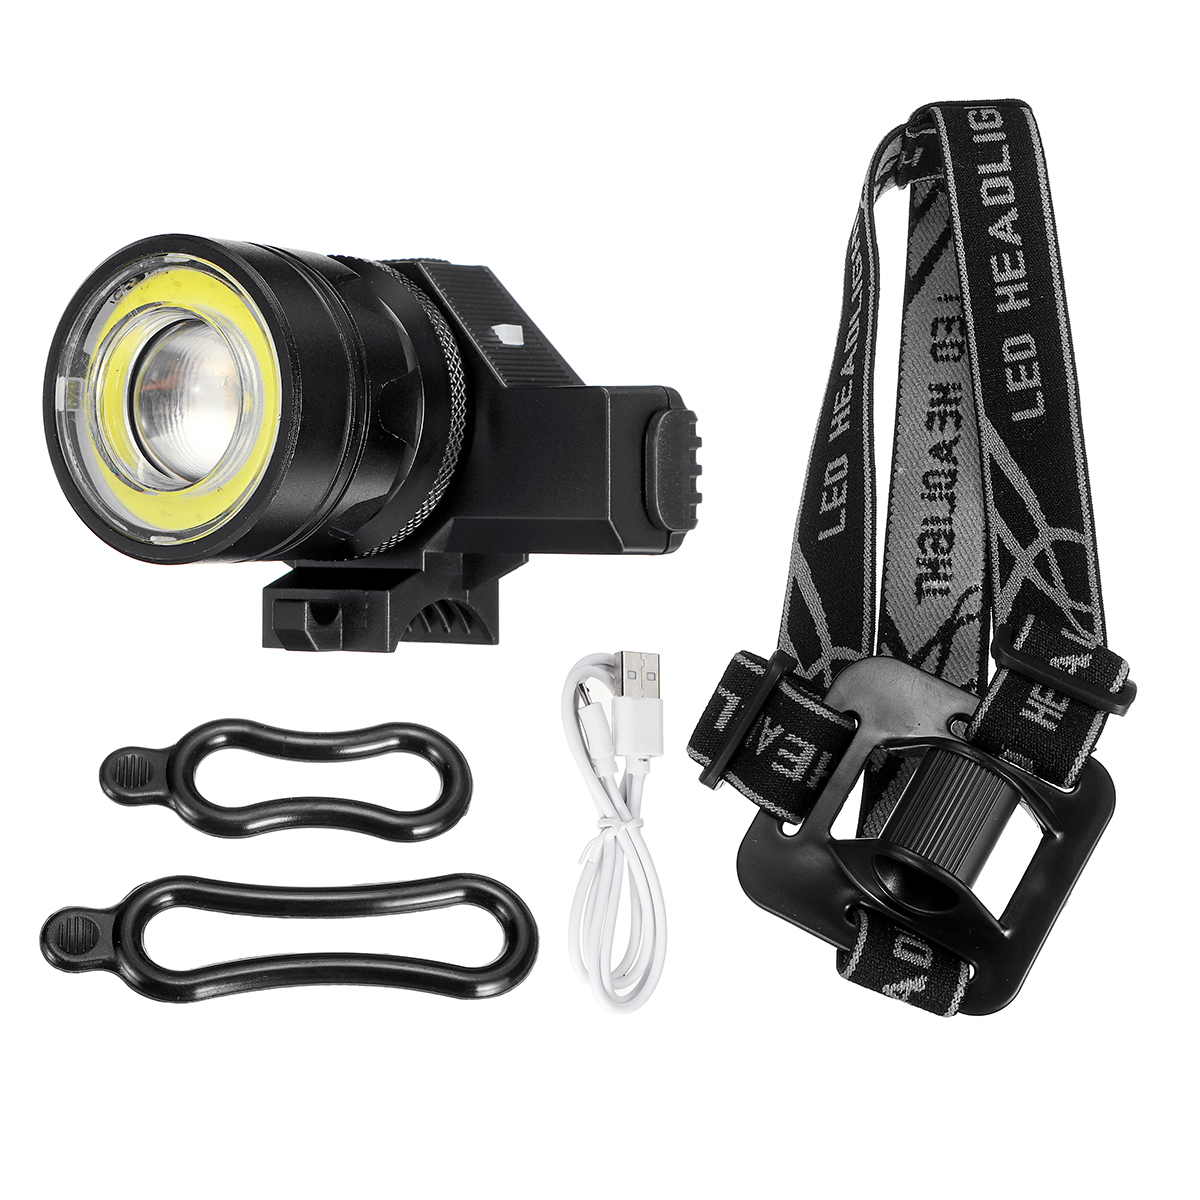 

50000LM T6 COB LED Rechargeable Headlamp Zoomable Bike Bicycle Head Light Lamp